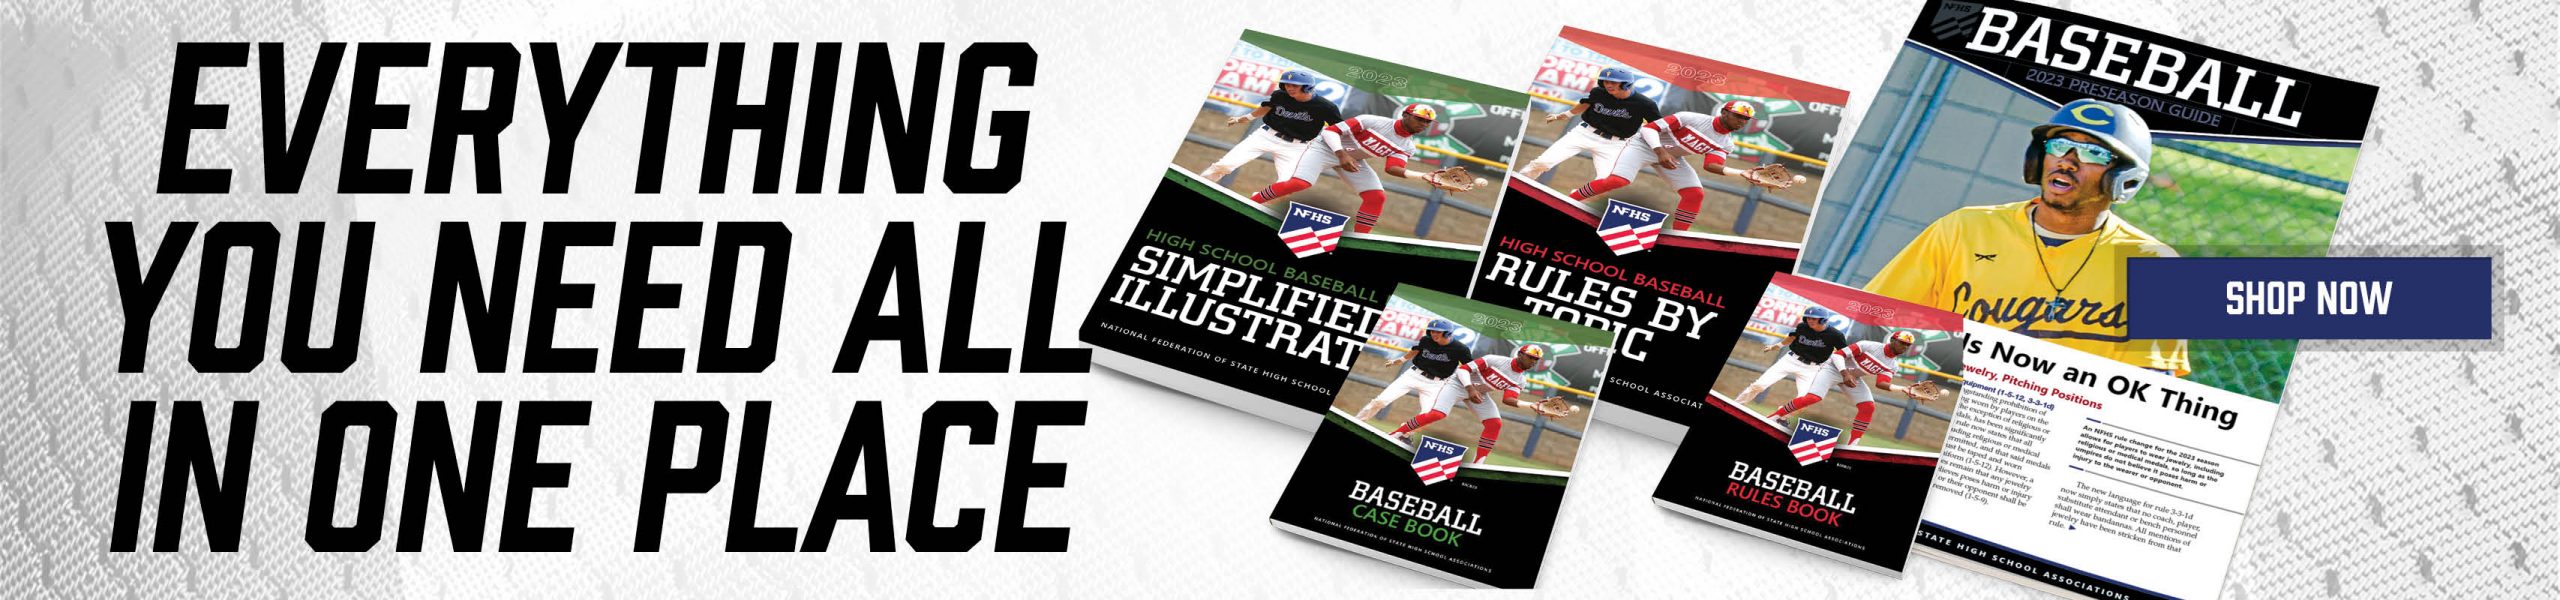 Baseball – Everything You Need All In One Place